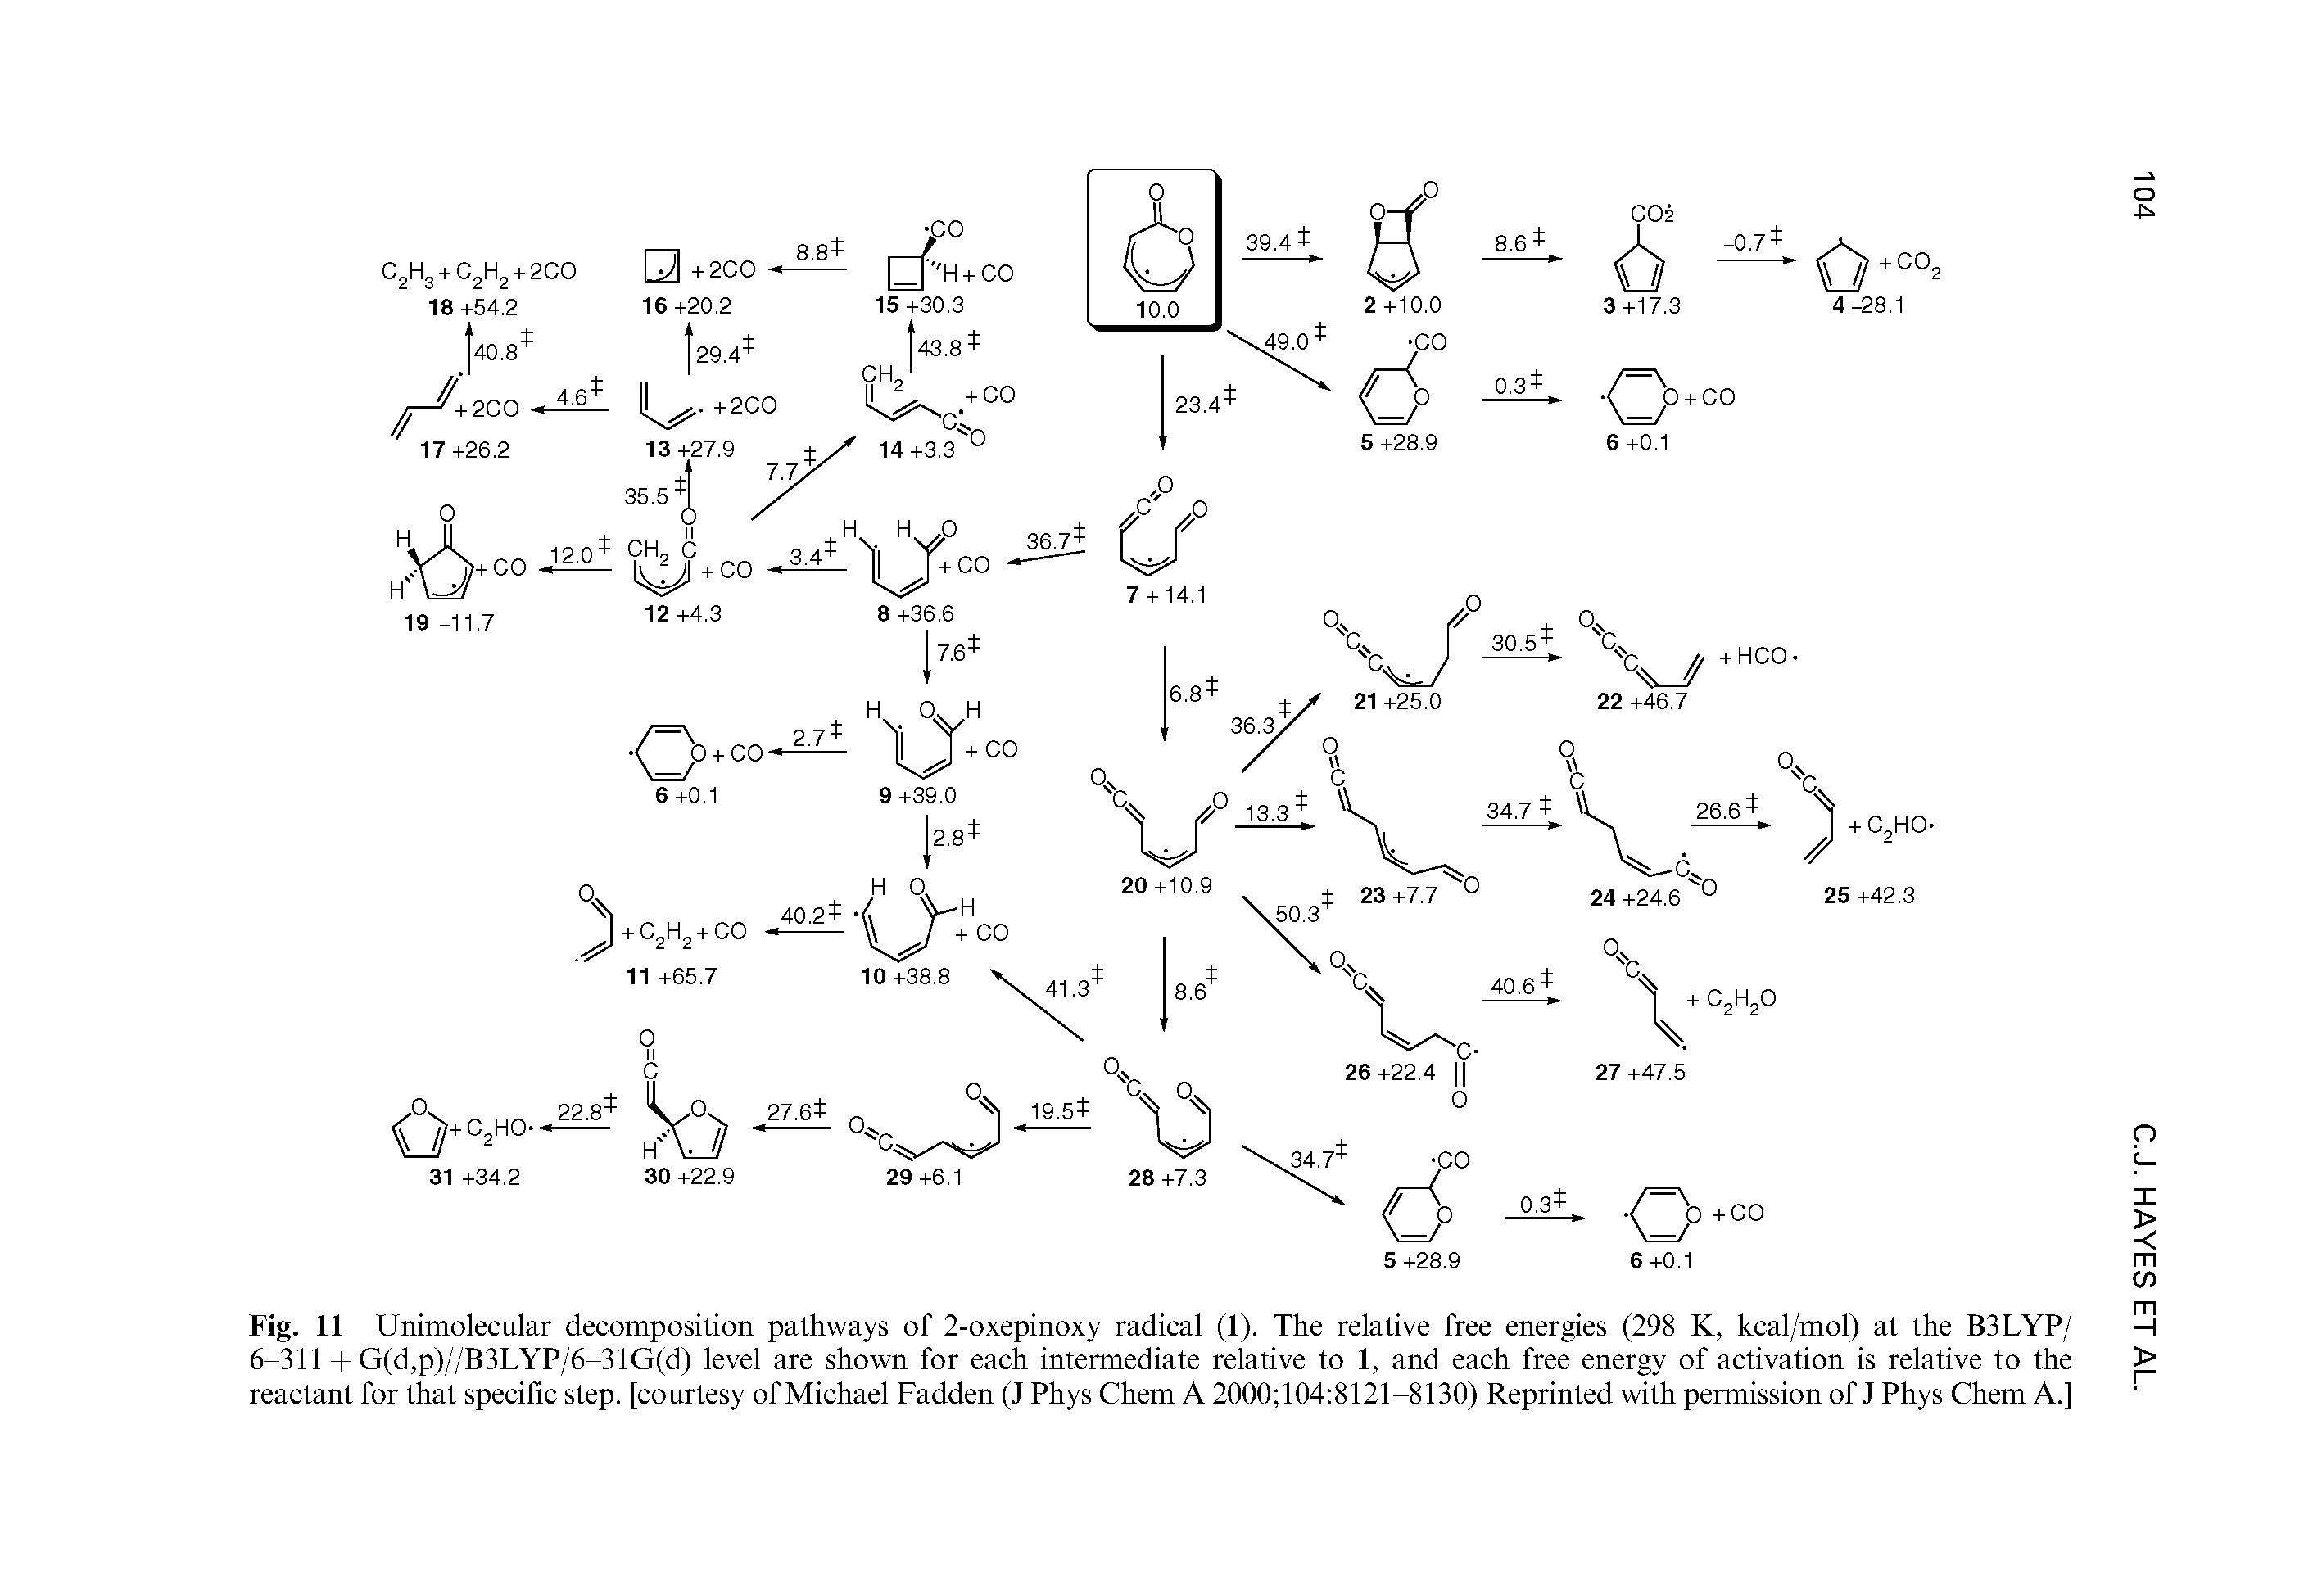 Fig. 11 Unimolecular decomposition pathways of 2-oxepinoxy radical (1). The relative free energies (298 K, kcal/mol) at the B3LYP/ 6-311 + G(d,p)//B3LYP/6-31G(d) level are shown for each intemiediate relative to 1, and each free energy of activation is relative to the reactant for that specific step, [courtesy of Michael Fadden (J Phys Chem A 2000 104 8121-8130) Reprinted with permission of J Phys Chem A.]...